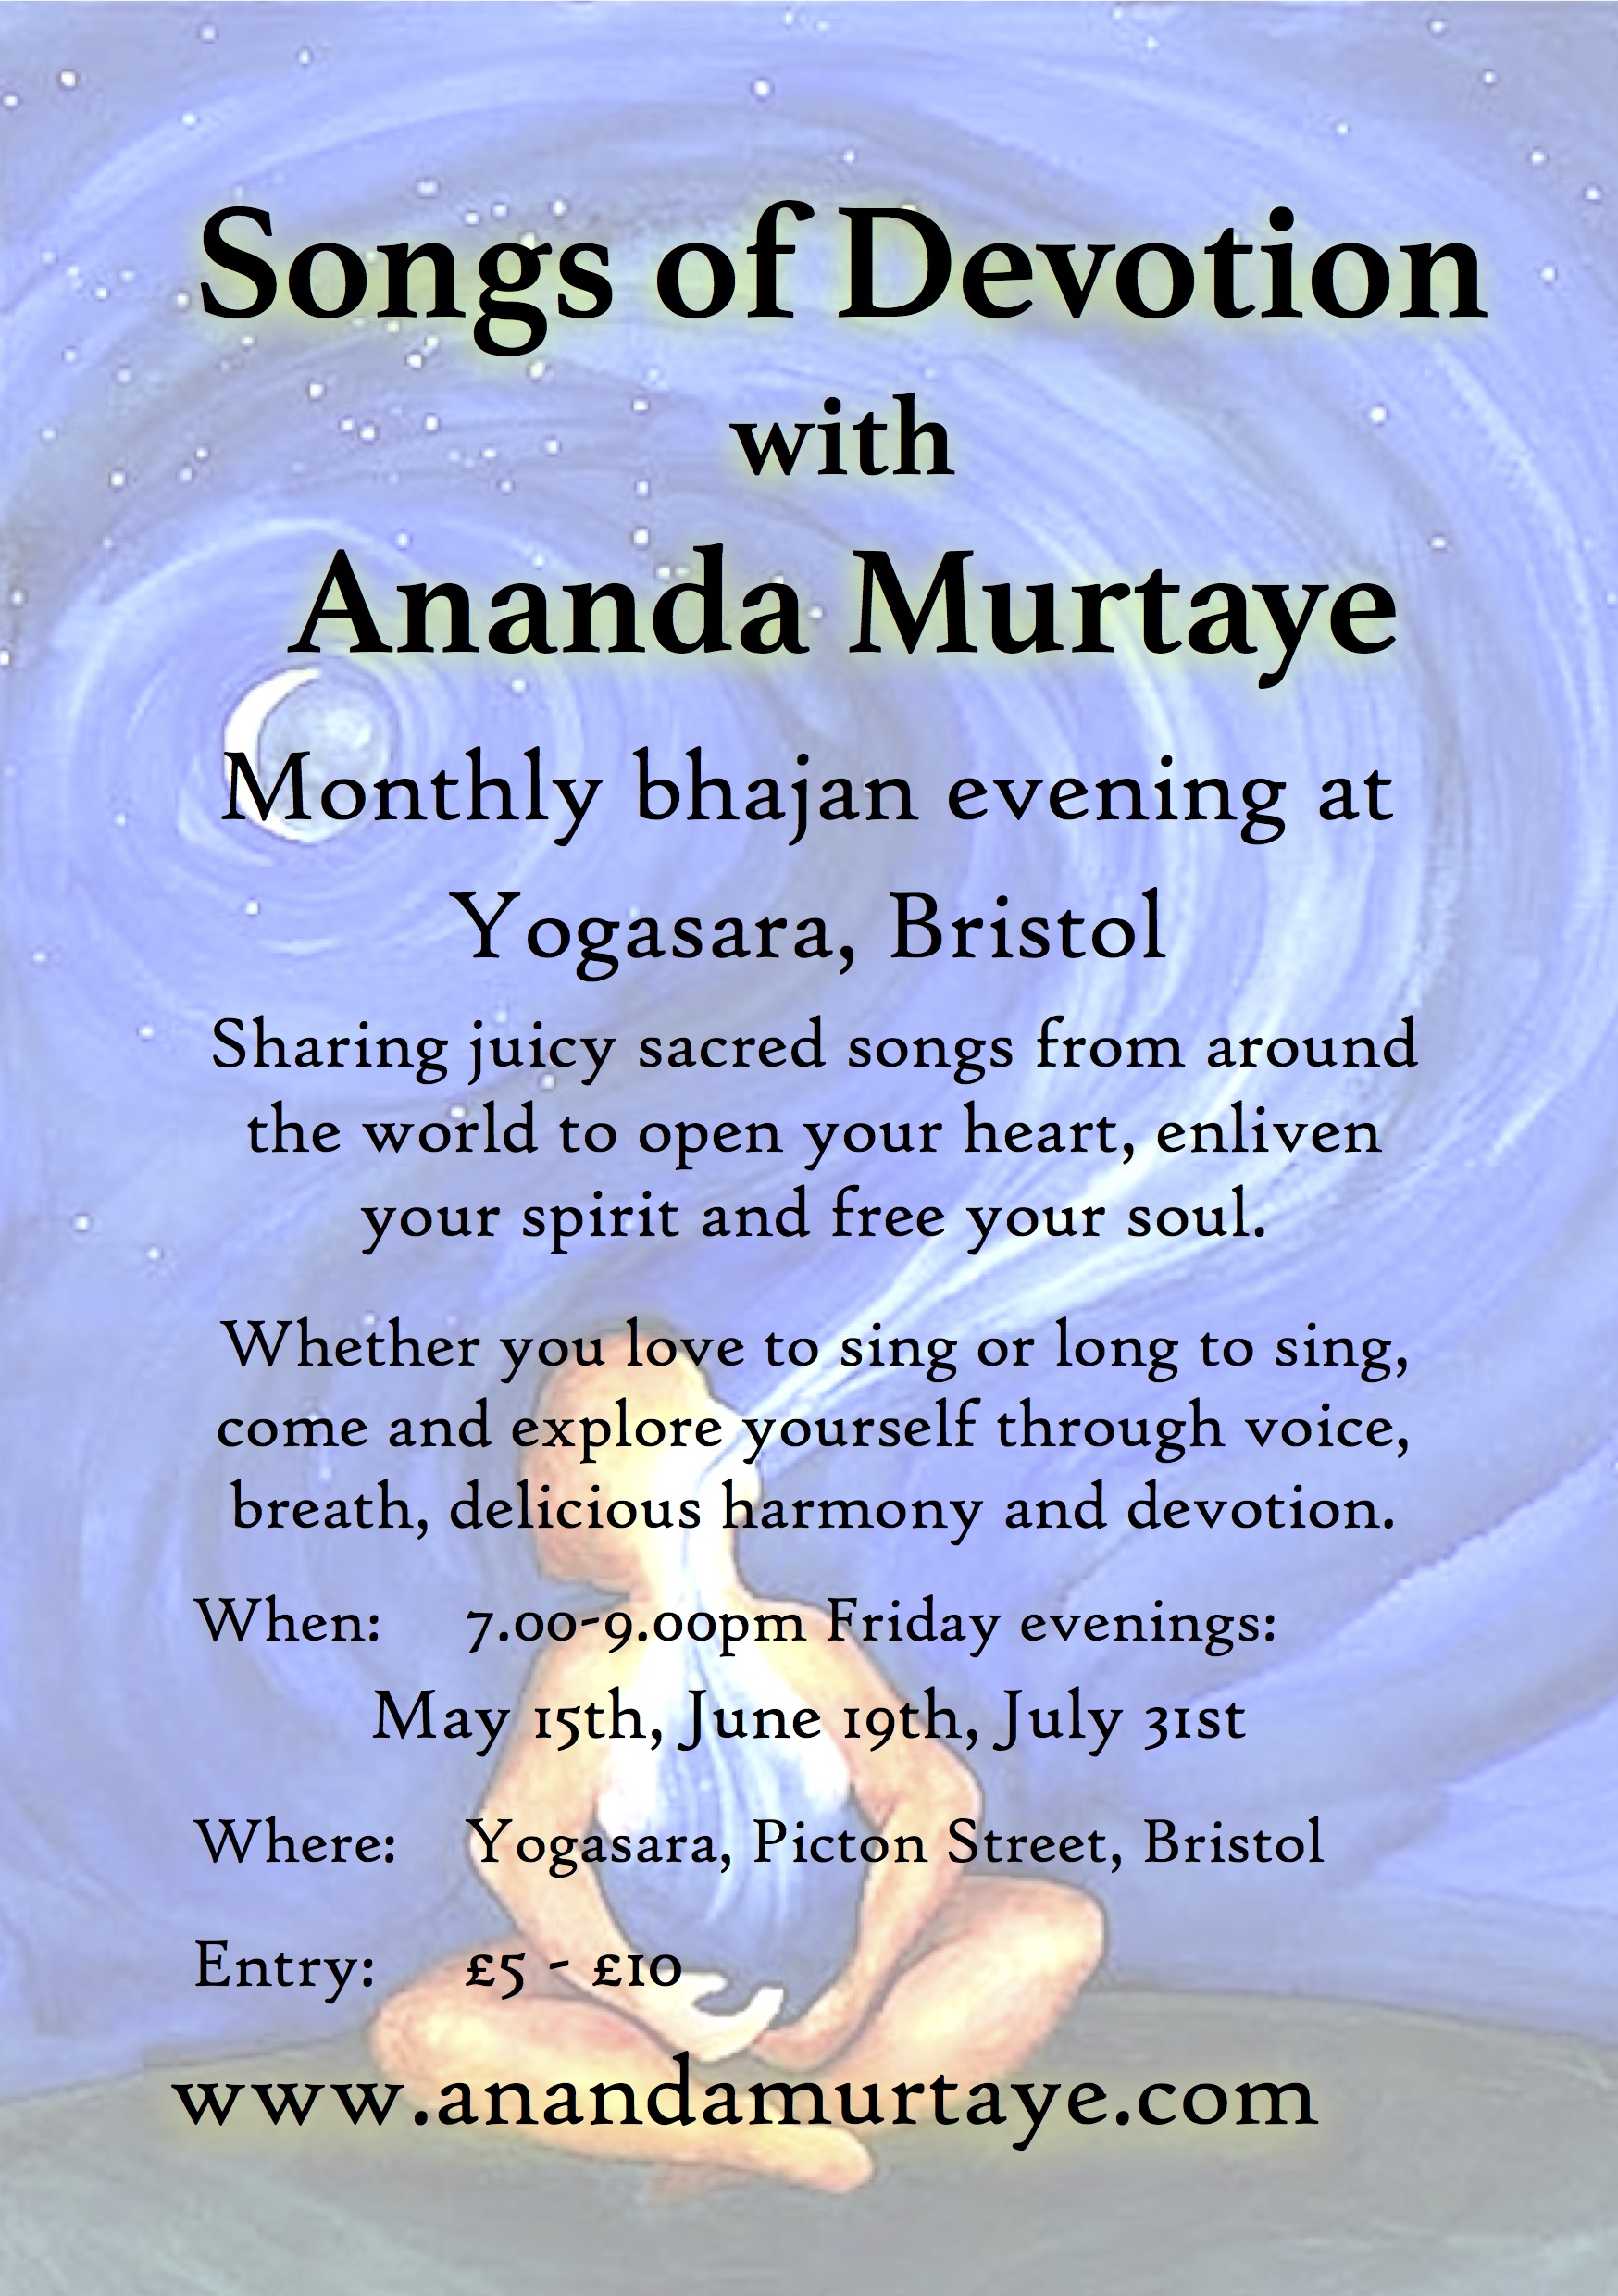 BRISTOL - Songs of Devotion, bhajans and mantras